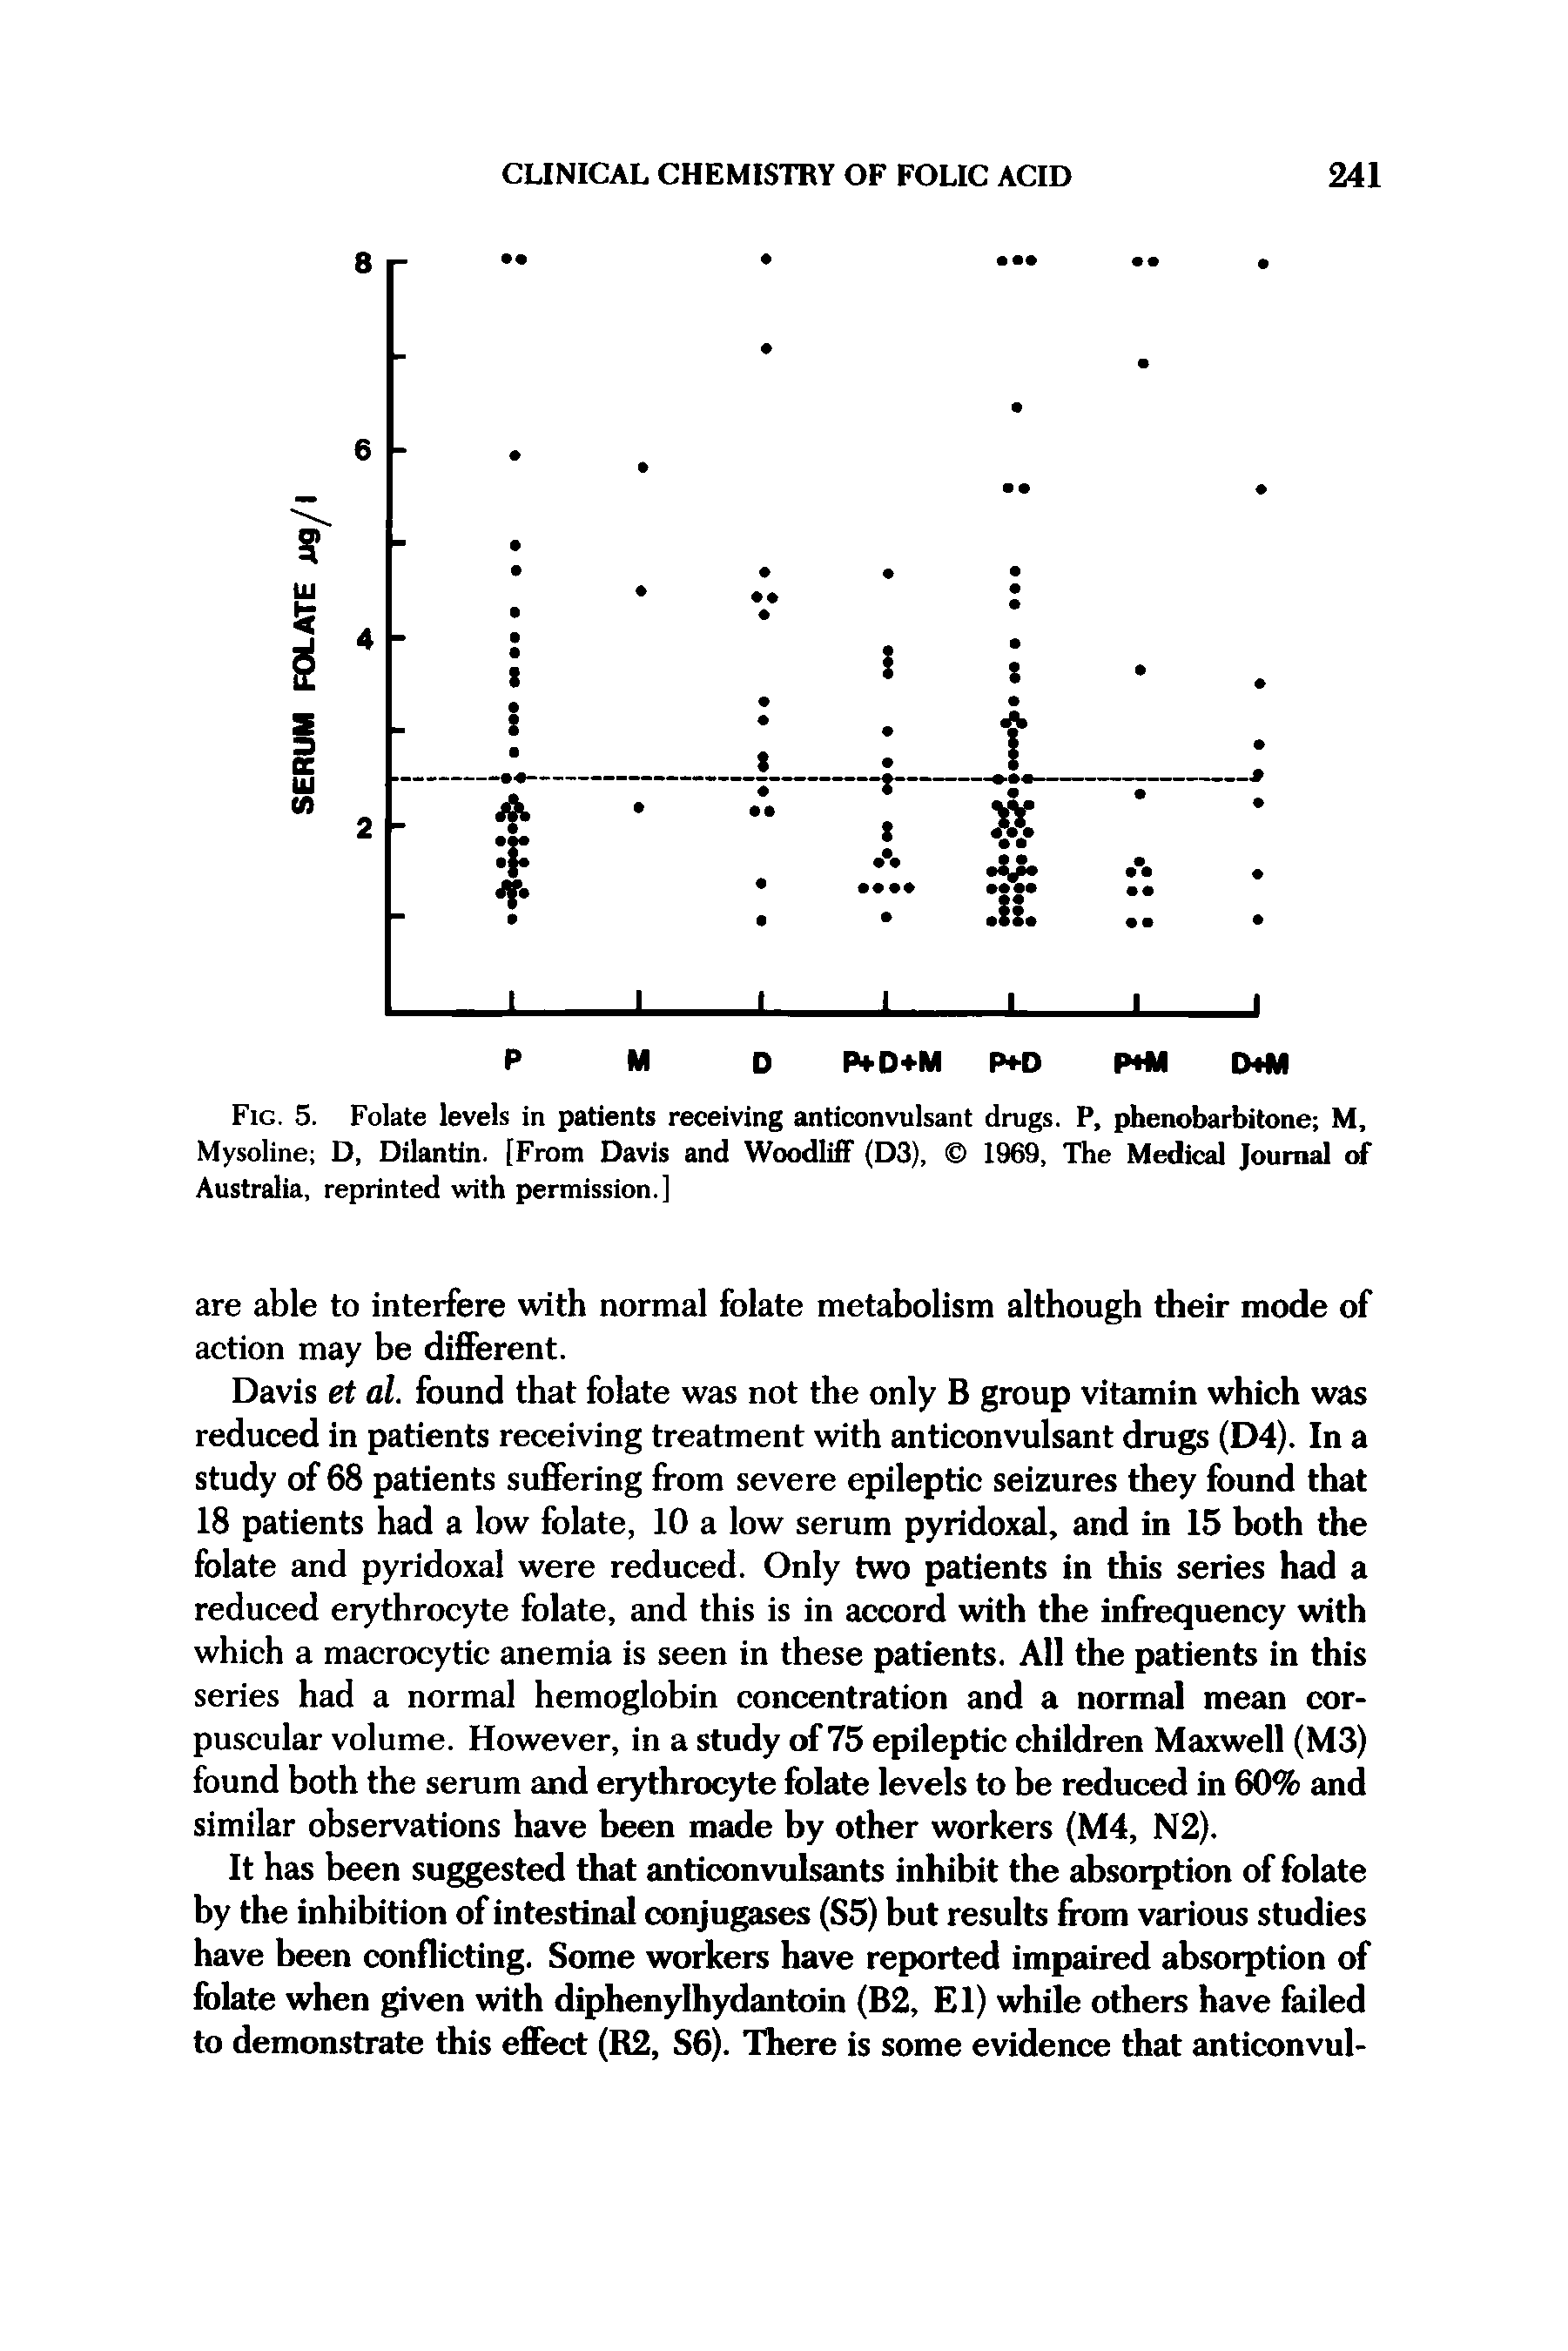 Fig. 5. Folate levels in patients receiving anticonvulsant drugs. P, phenobarbitone M, Mysoline D, Dilantin. [From Davis and Woodliff (D3), 1969, Tbe Medical Journal of Australia, reprinted with permission.]...